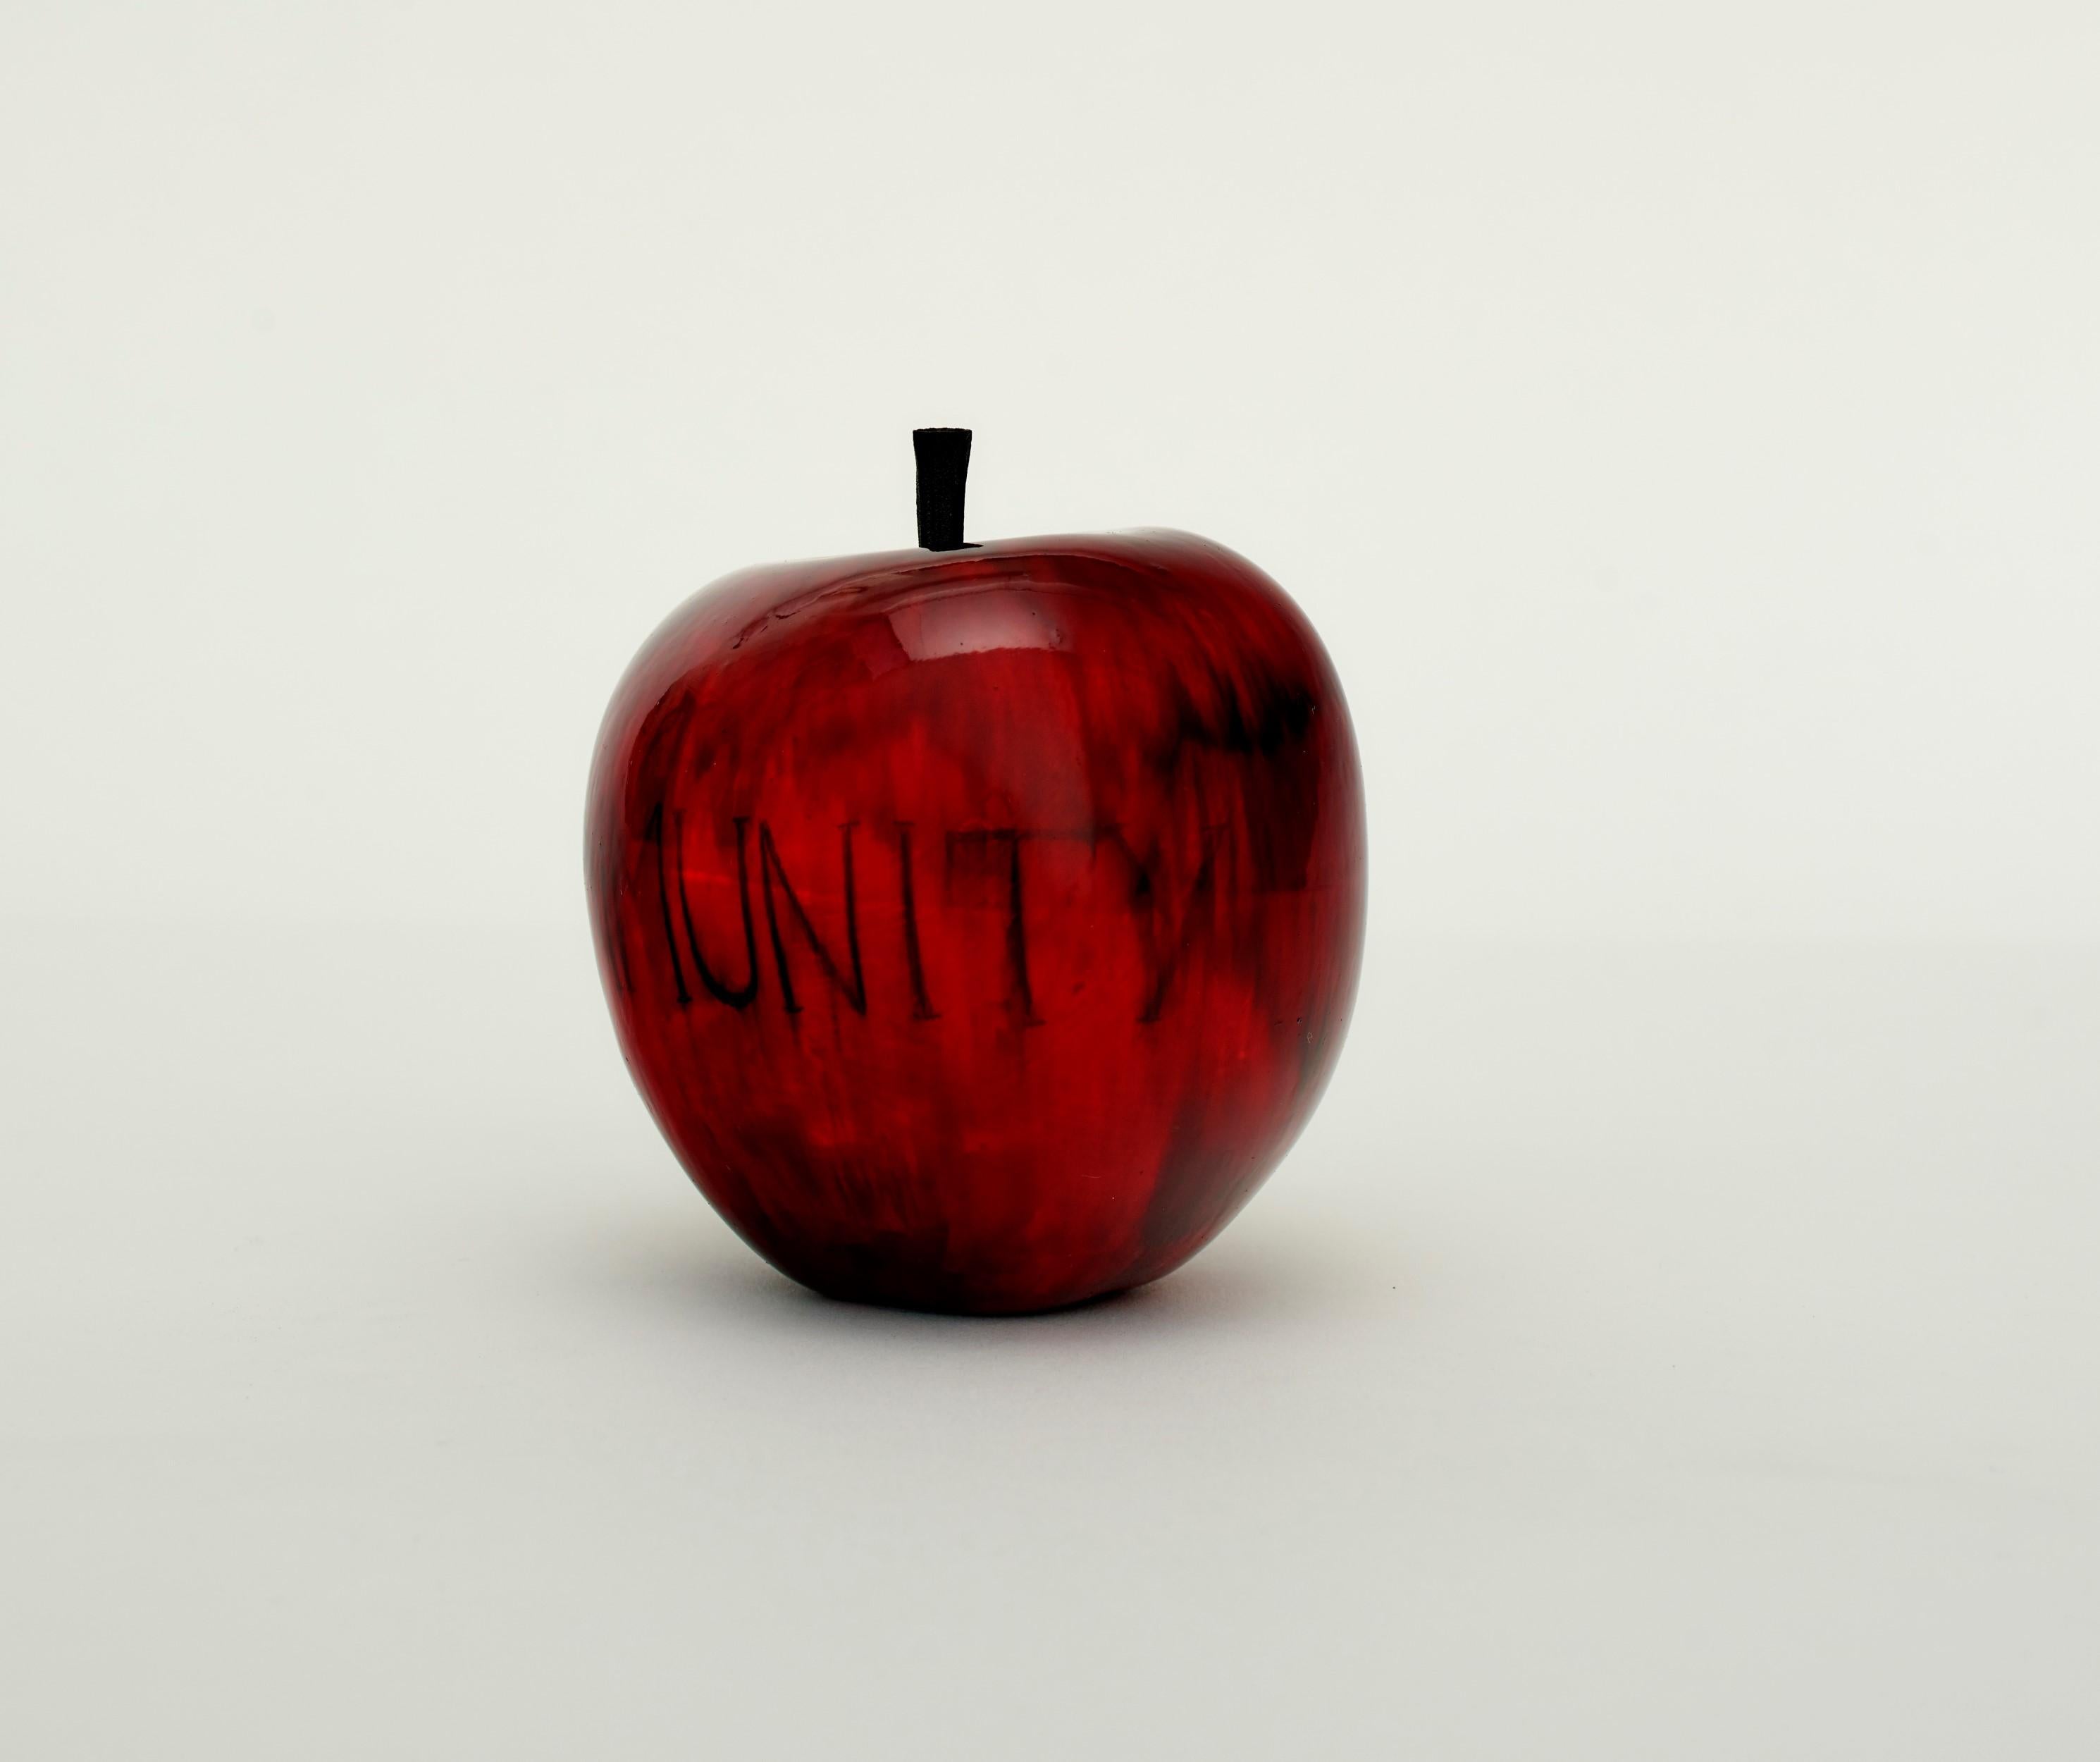 Community (Apple) - Contemporary Sculpture by Barnaby Barford